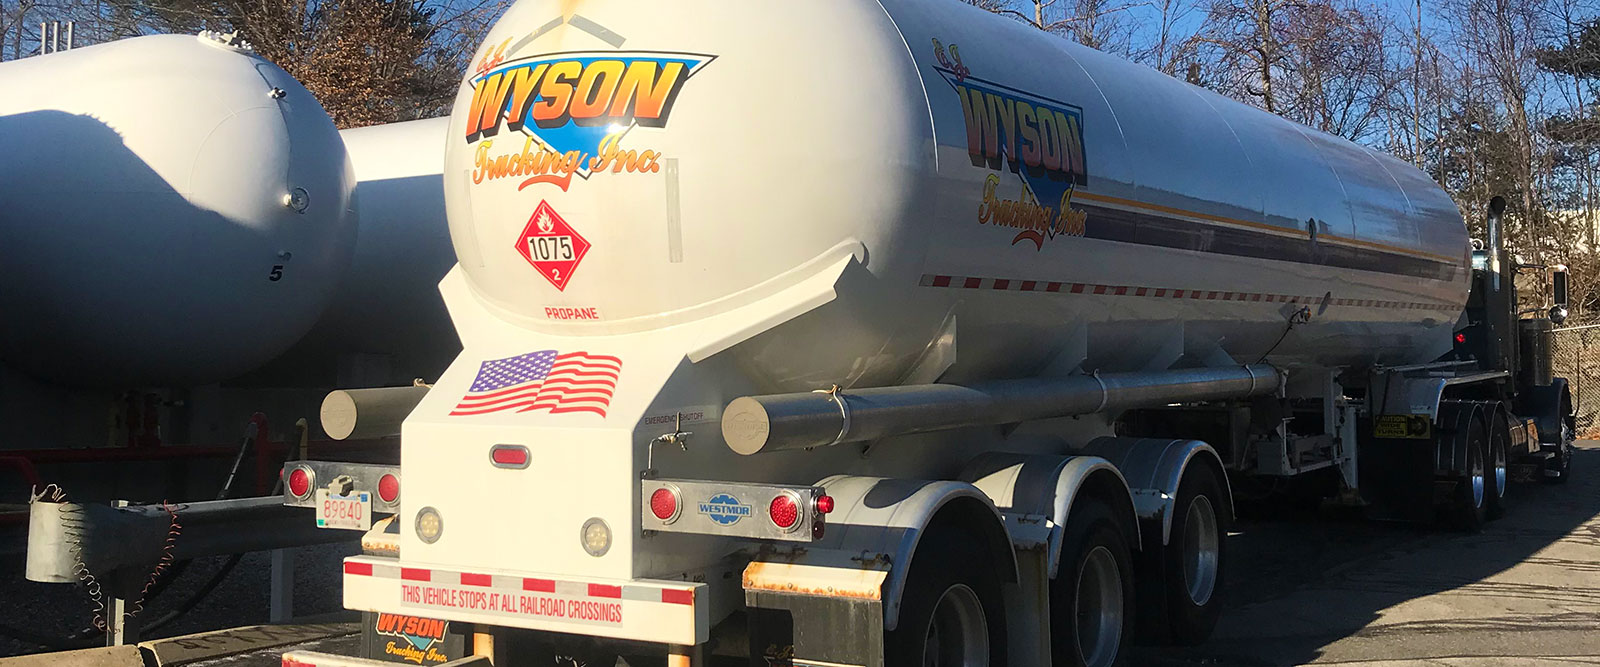 Ej Wyson Trucking—ma Commercial Trucking And Hauling Company Based In